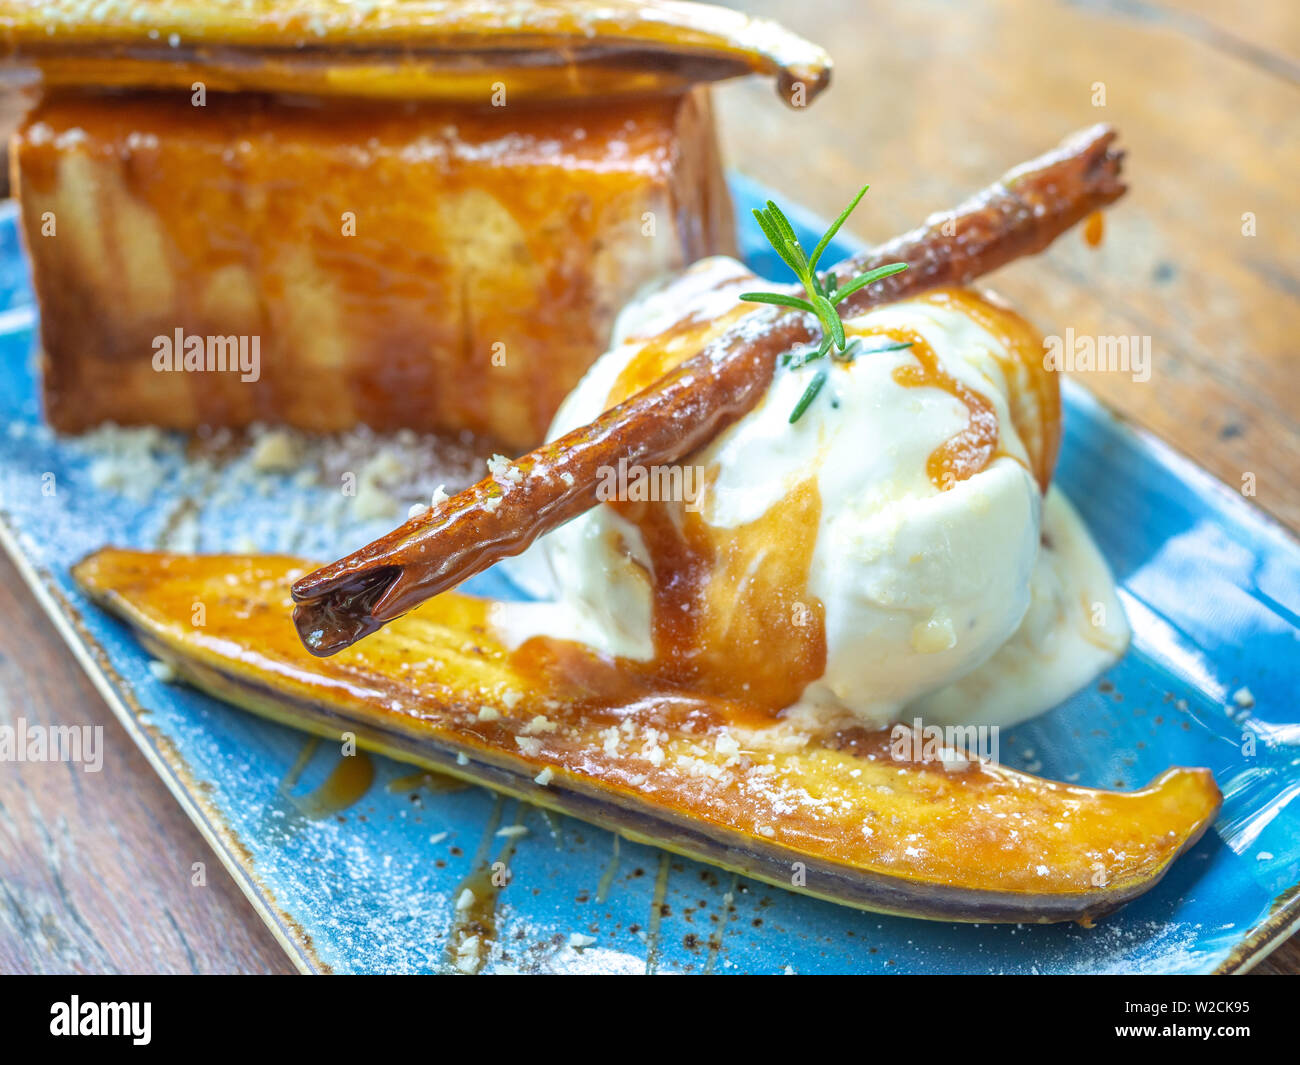 Vanilla Ice cream topping with caramel on ceramic plate on wooden table. Close-up Caramelized Banana Toast homemade dessert. Stock Photo